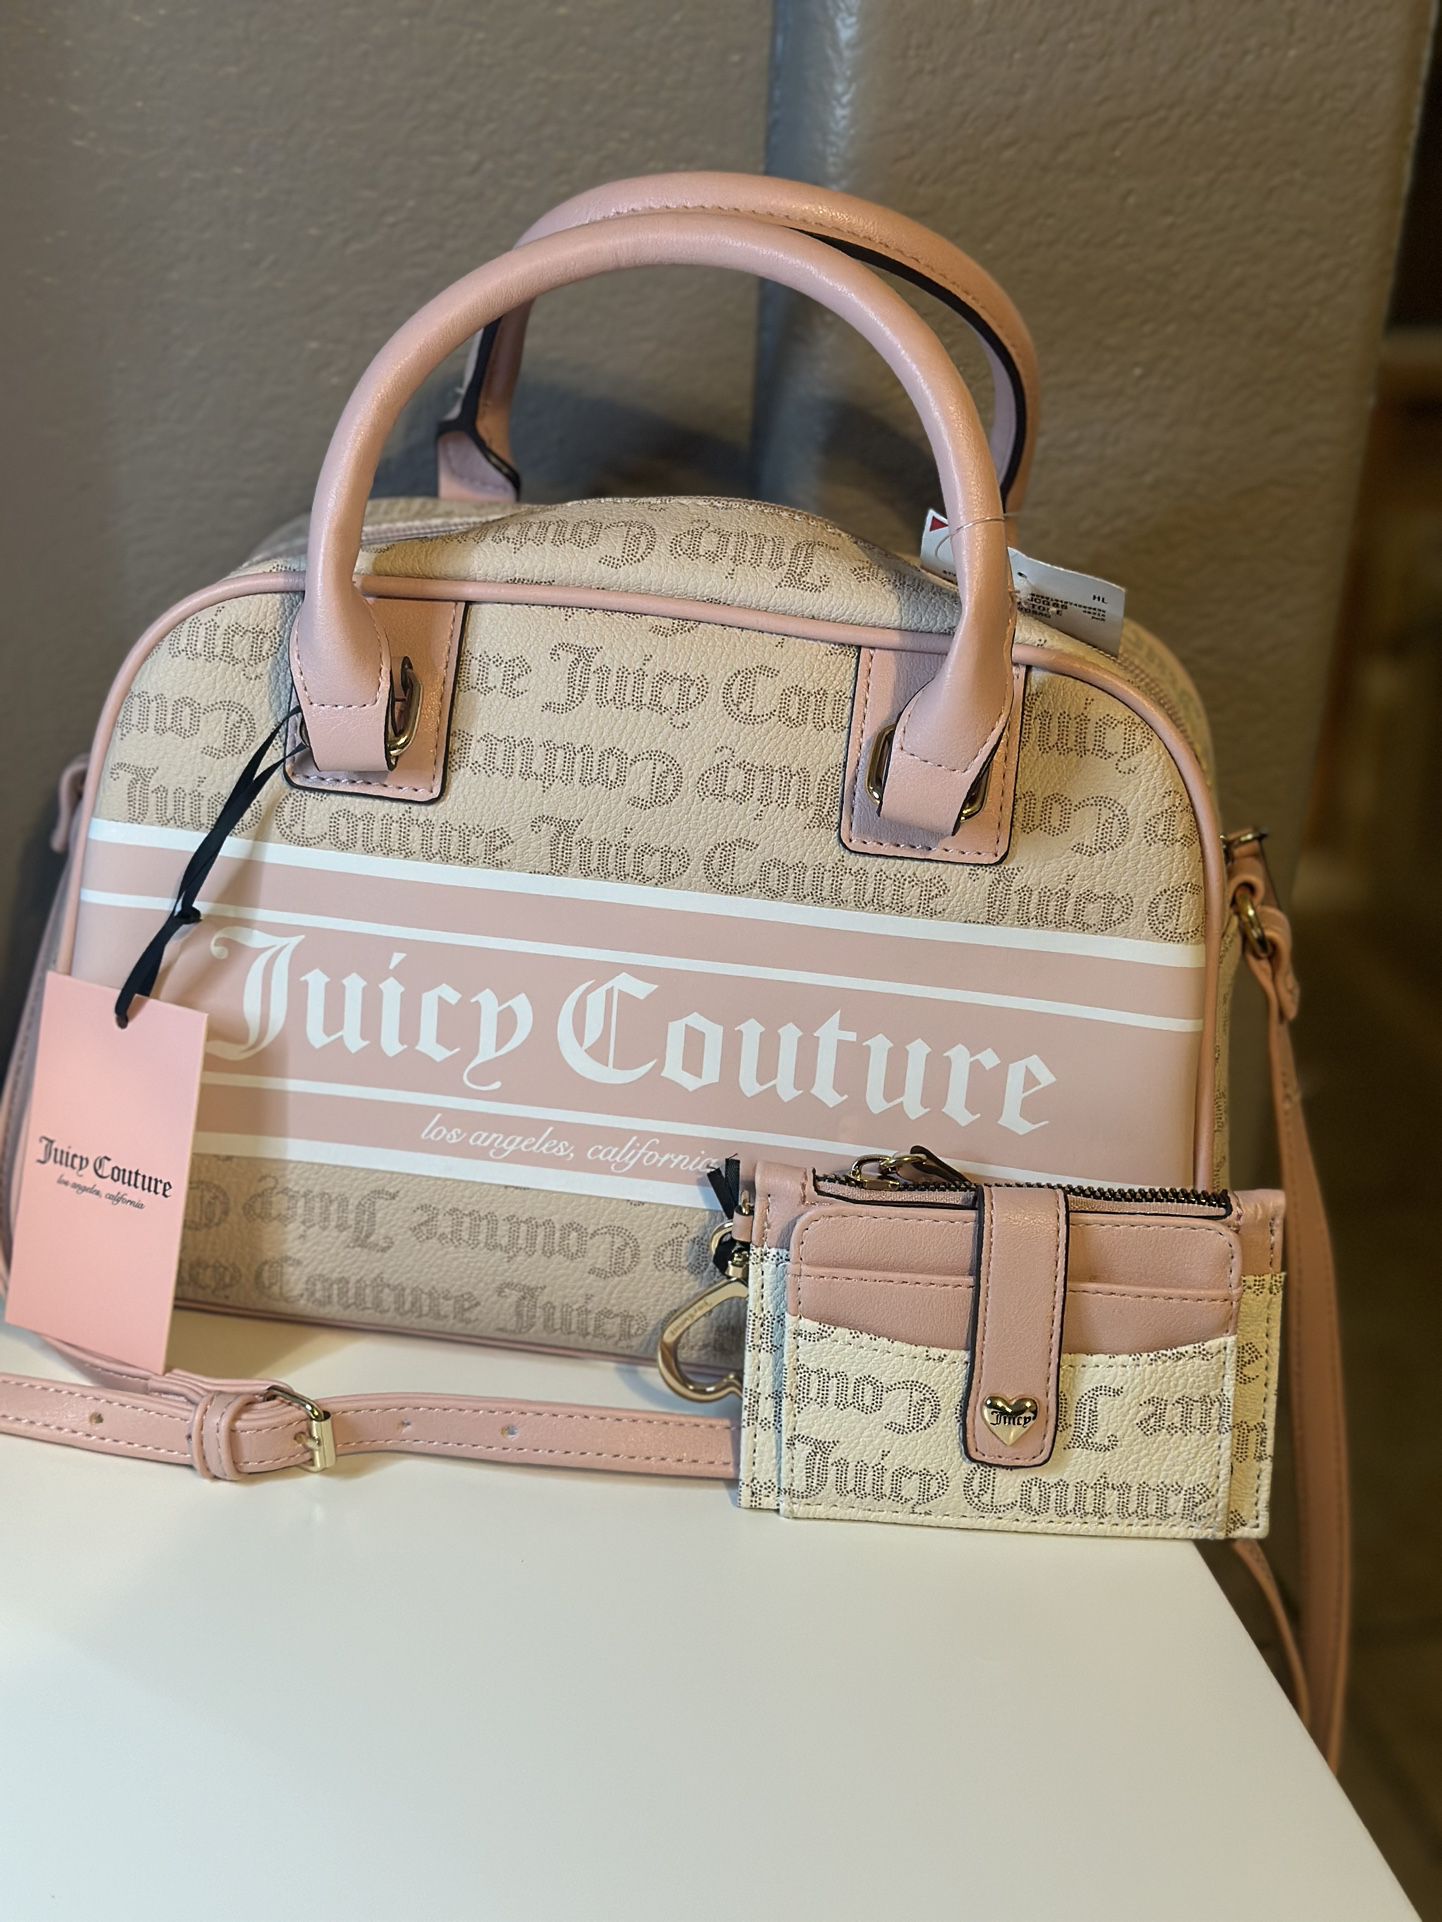 Juicy Couture Bag And Wallet 